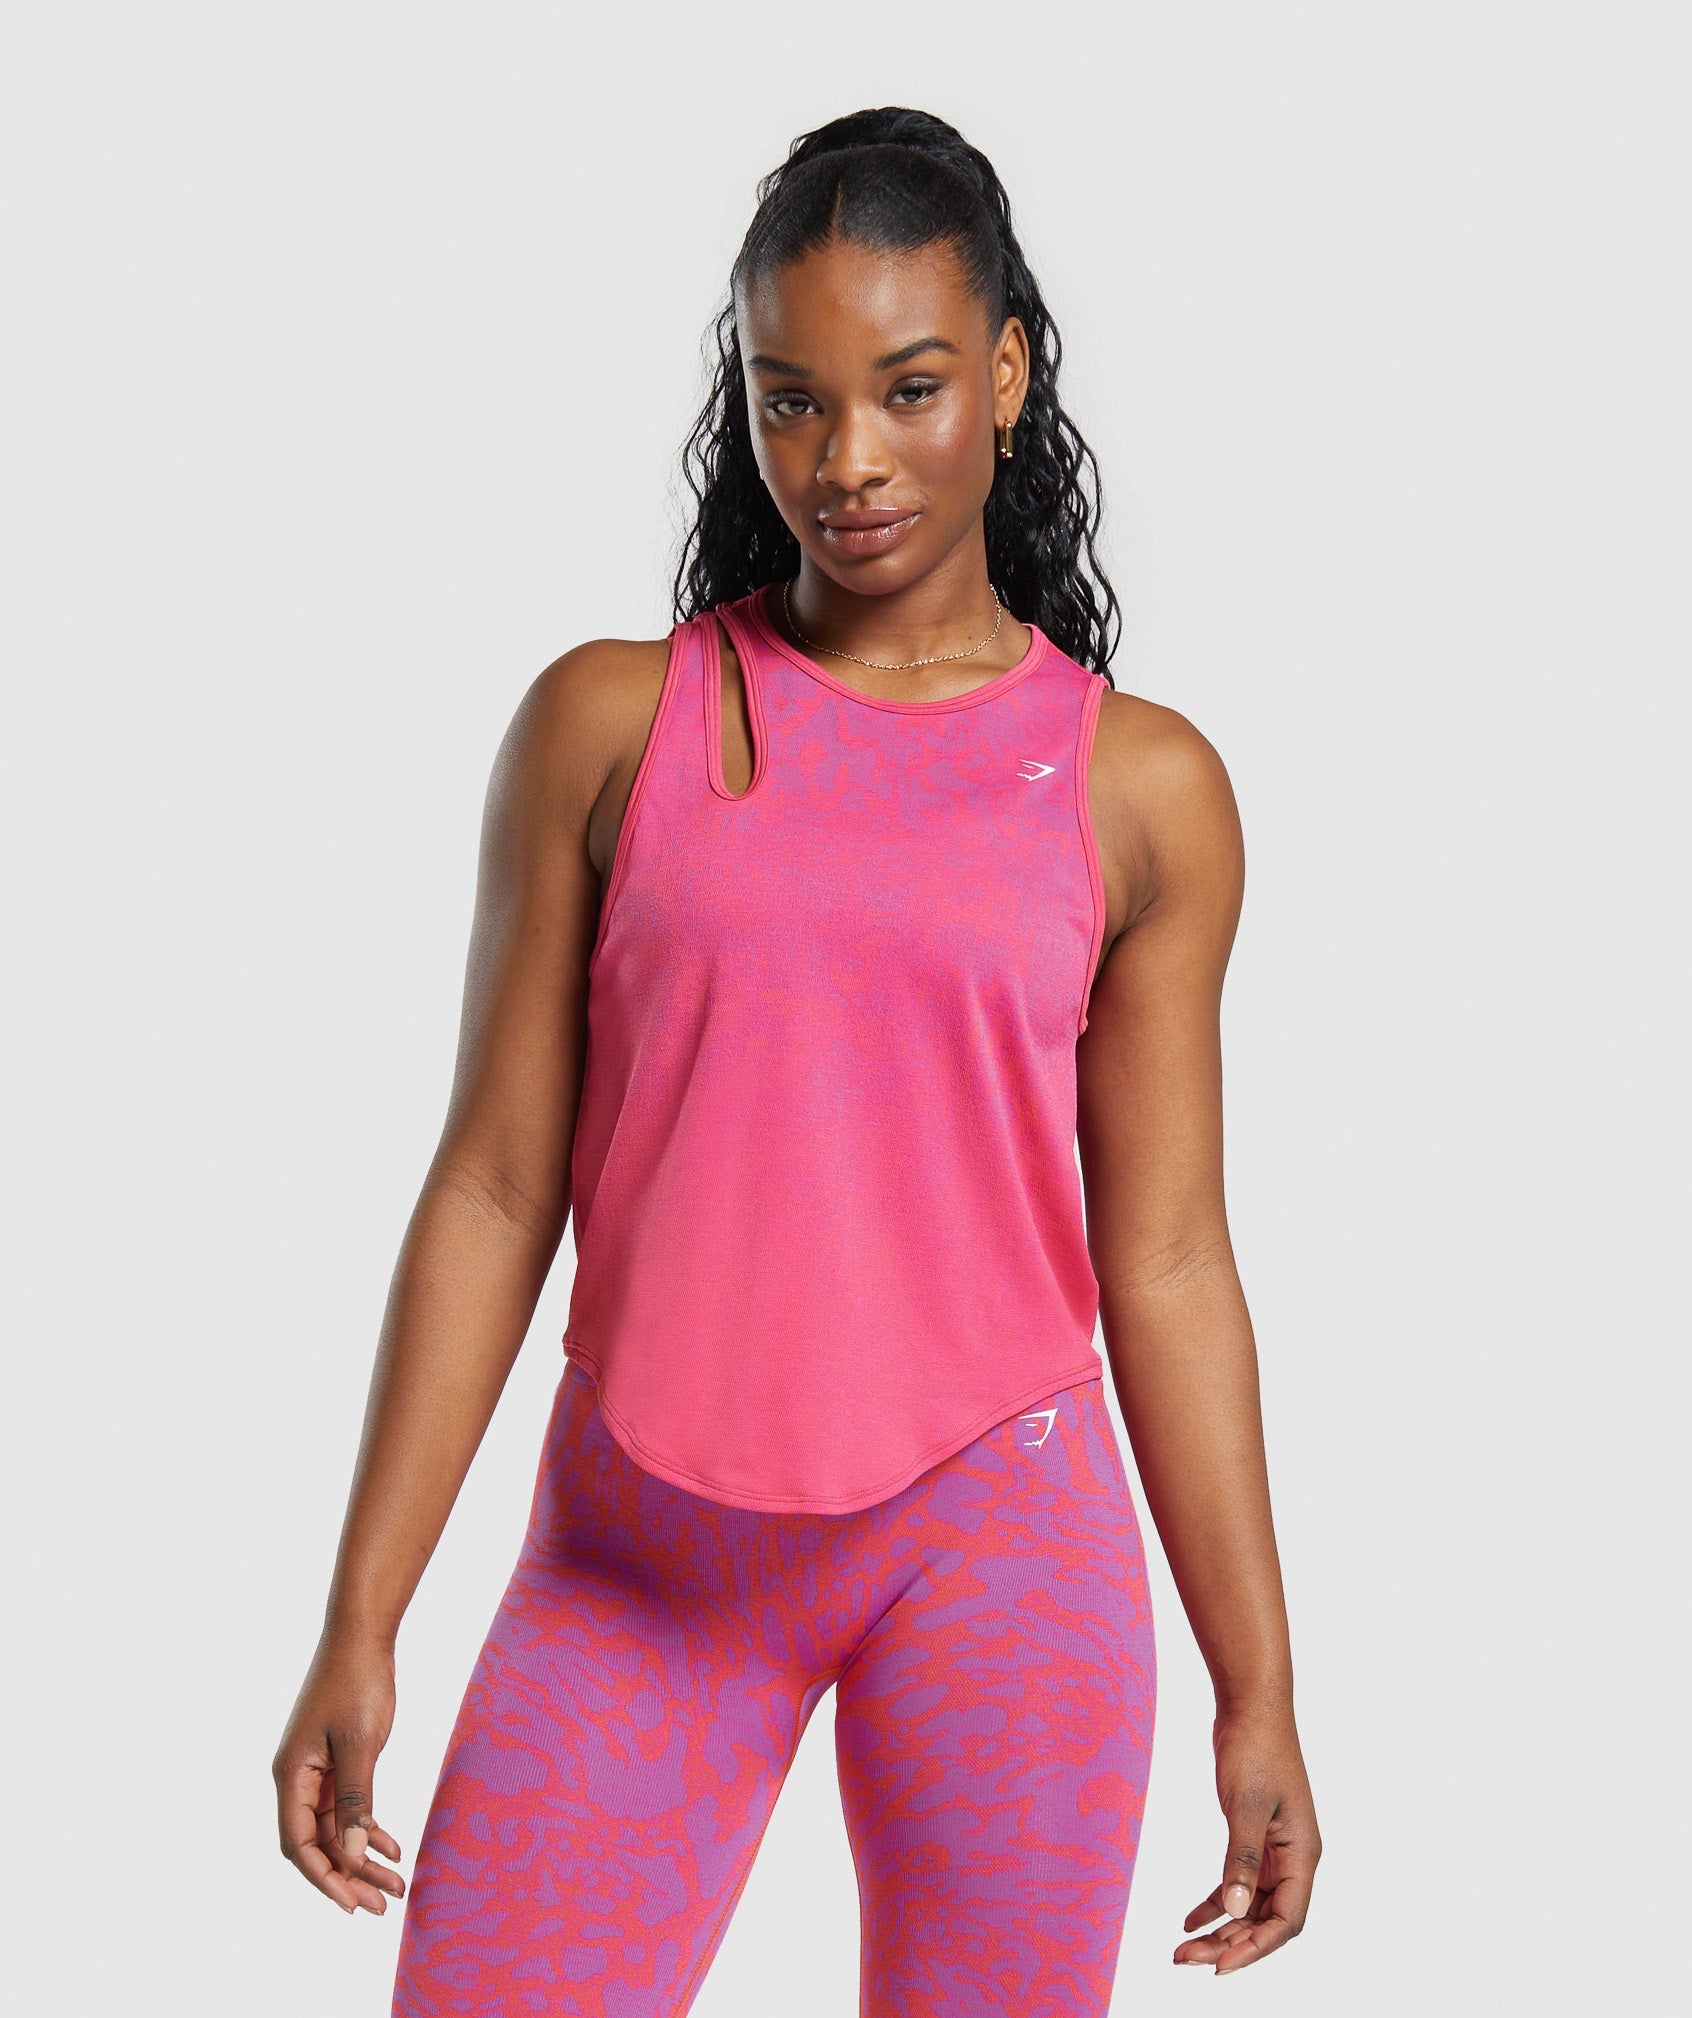 Adapt Safari Seamless Drop Arm Faded Tank in Shelly Pink/Fly Coral - view 1